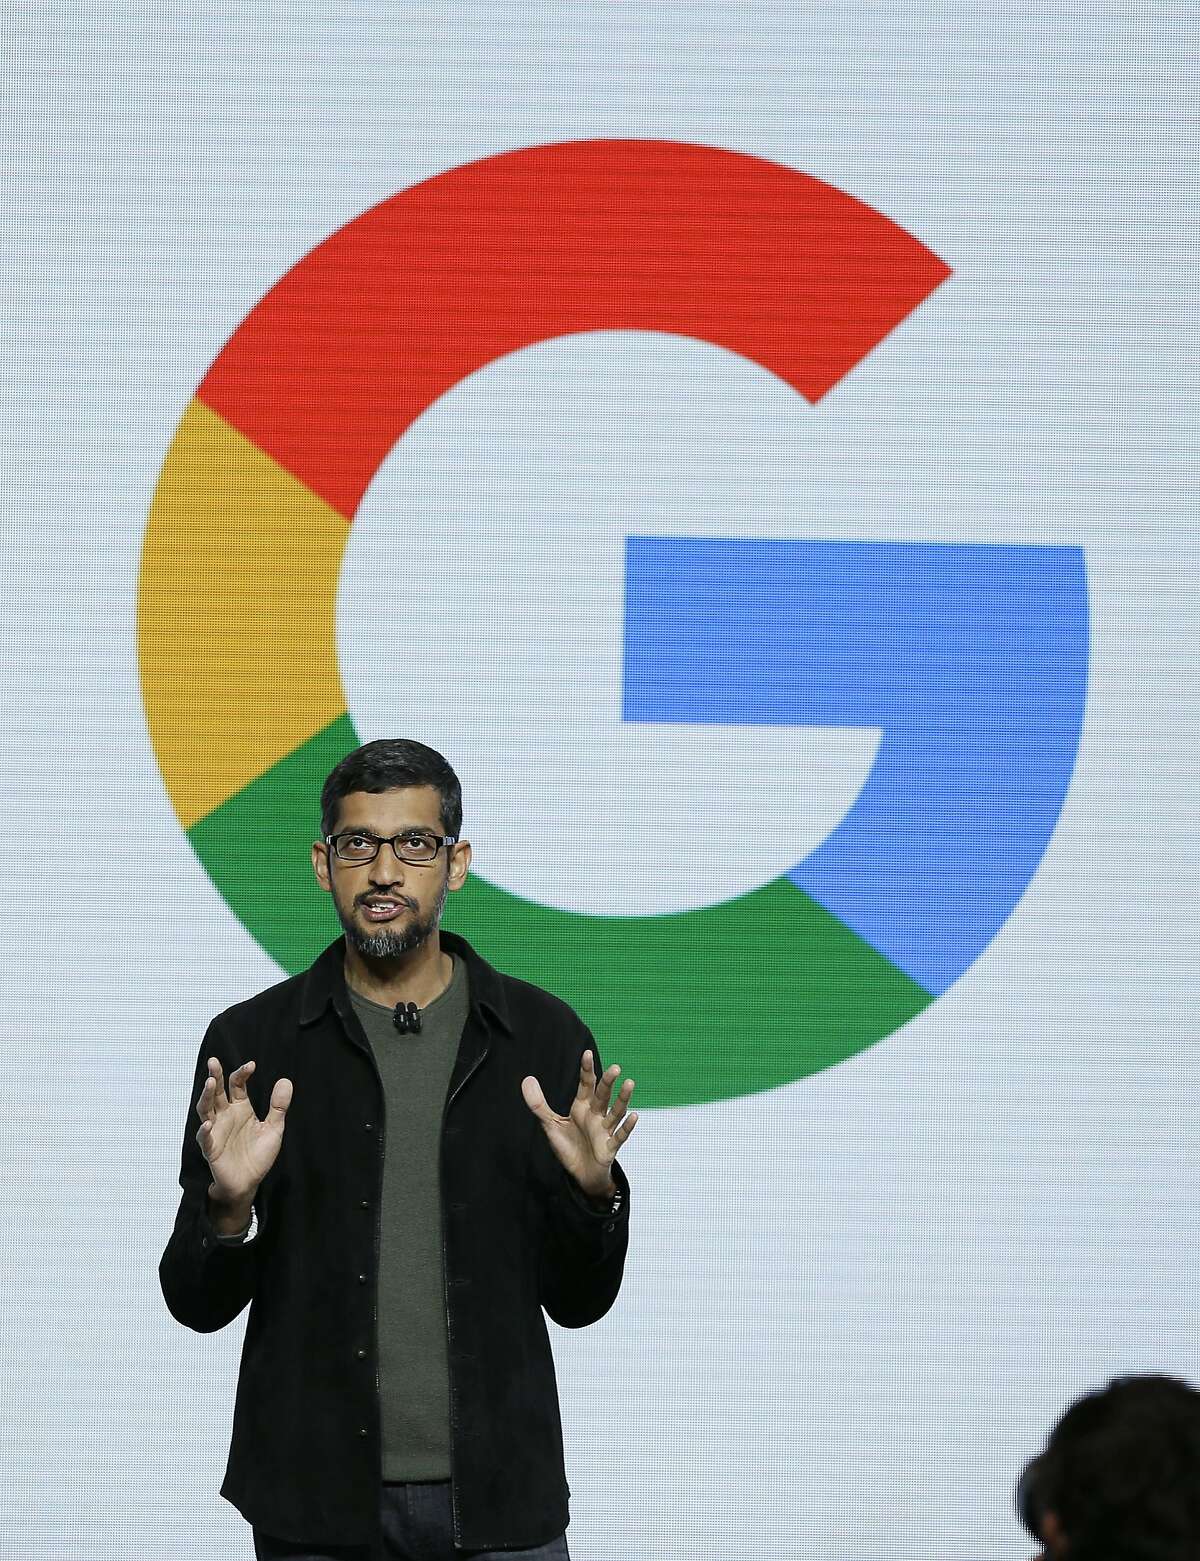 Google CEO Sundar Pichai speaks during a product event, Tuesday, Oct. 4, 2016, in San Francisco. Google launched an aggressive challenge to Apple and Samsung, introducing its own new line of smartphones called Pixel, which are designed to showcase a digital helper the company calls "Google Assistant." (AP Photo/Eric Risberg)